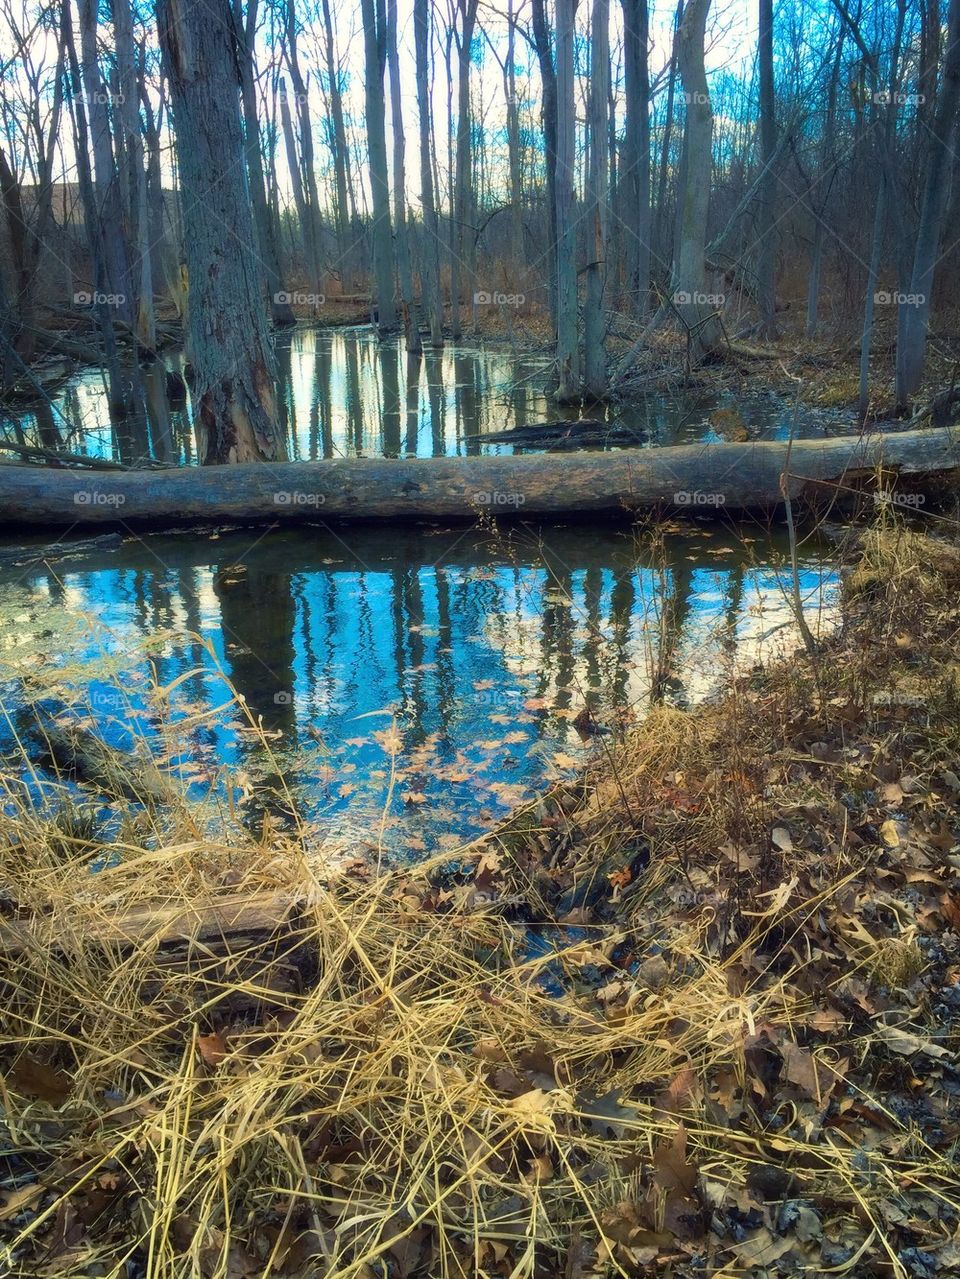 Forest trees reflecting on lake